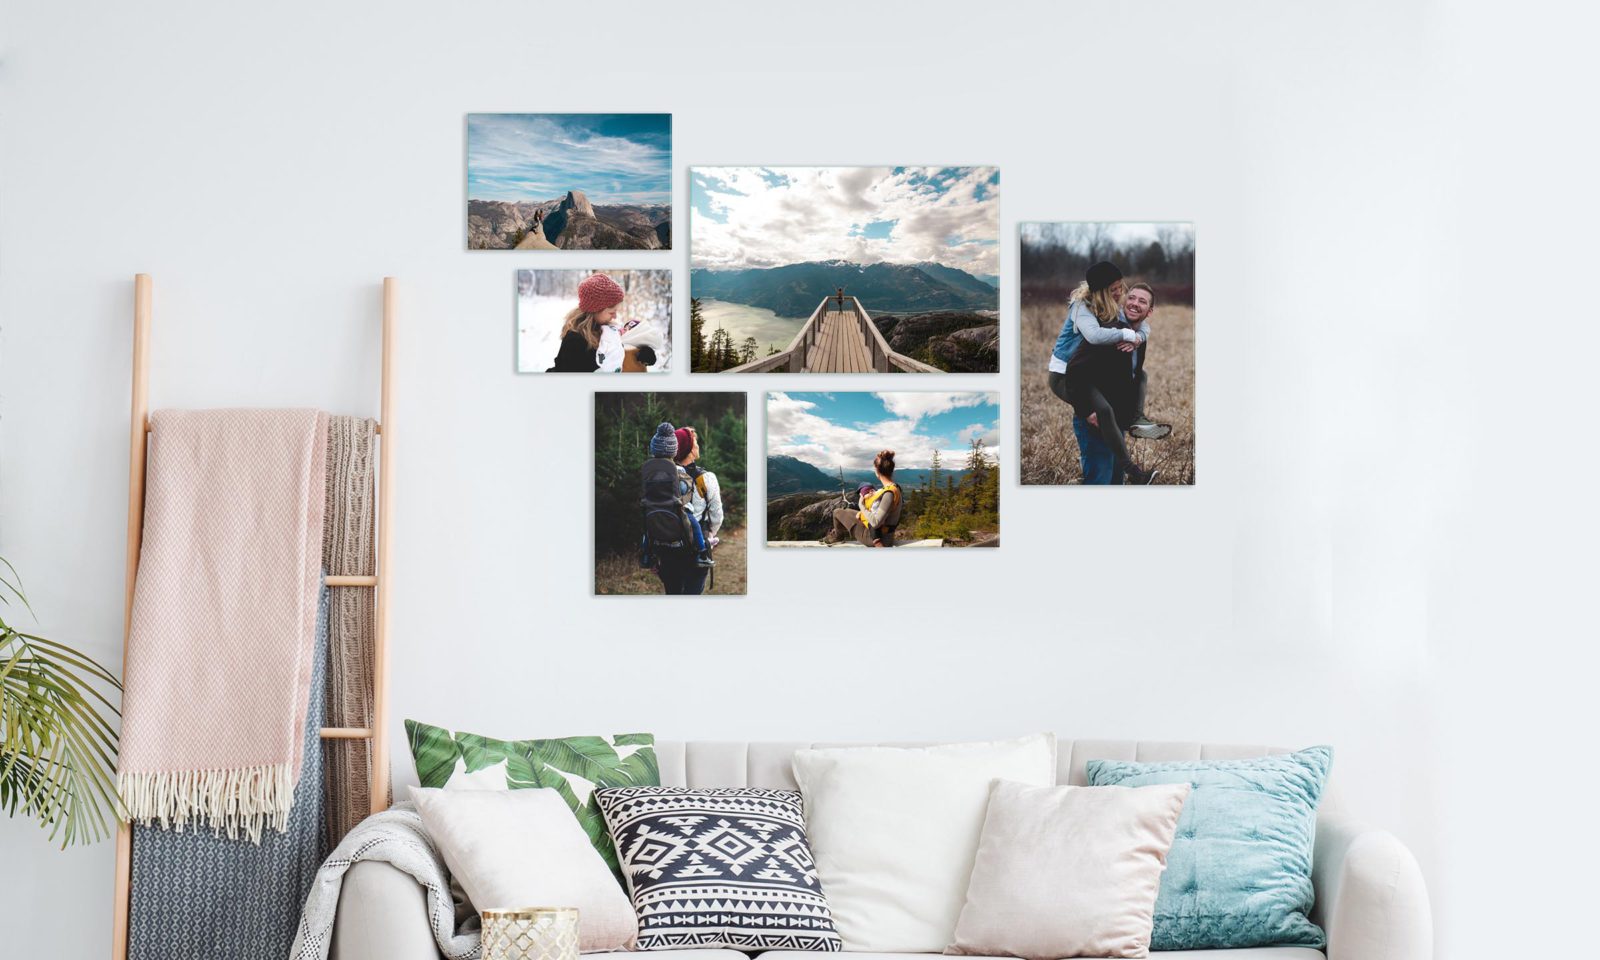 Decorating with Glass Photo Prints